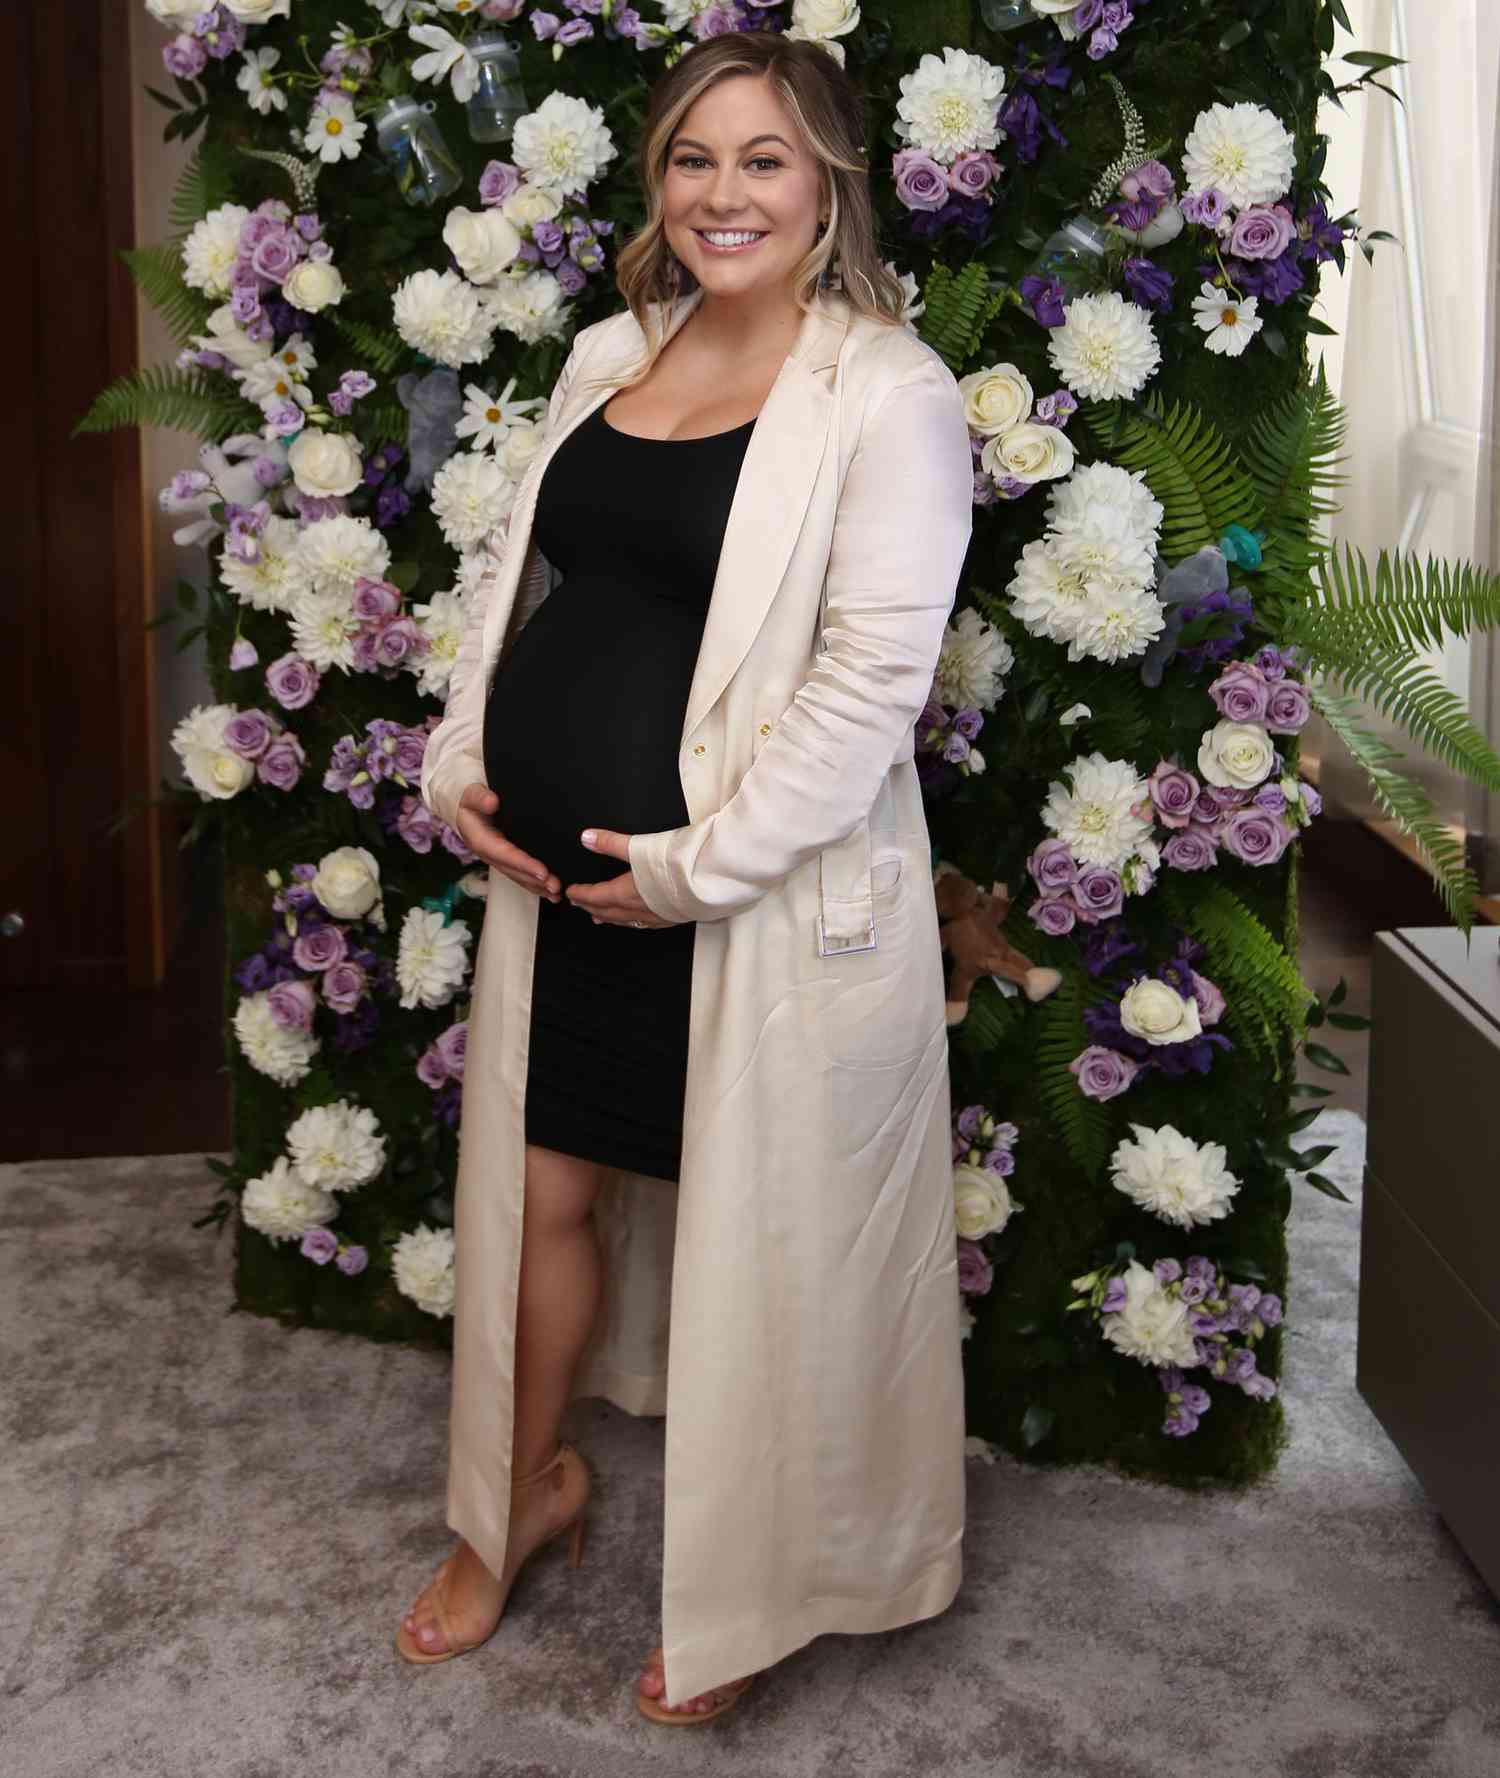 Shawn Johnson East Talks Celebrating After Genetic Test Results